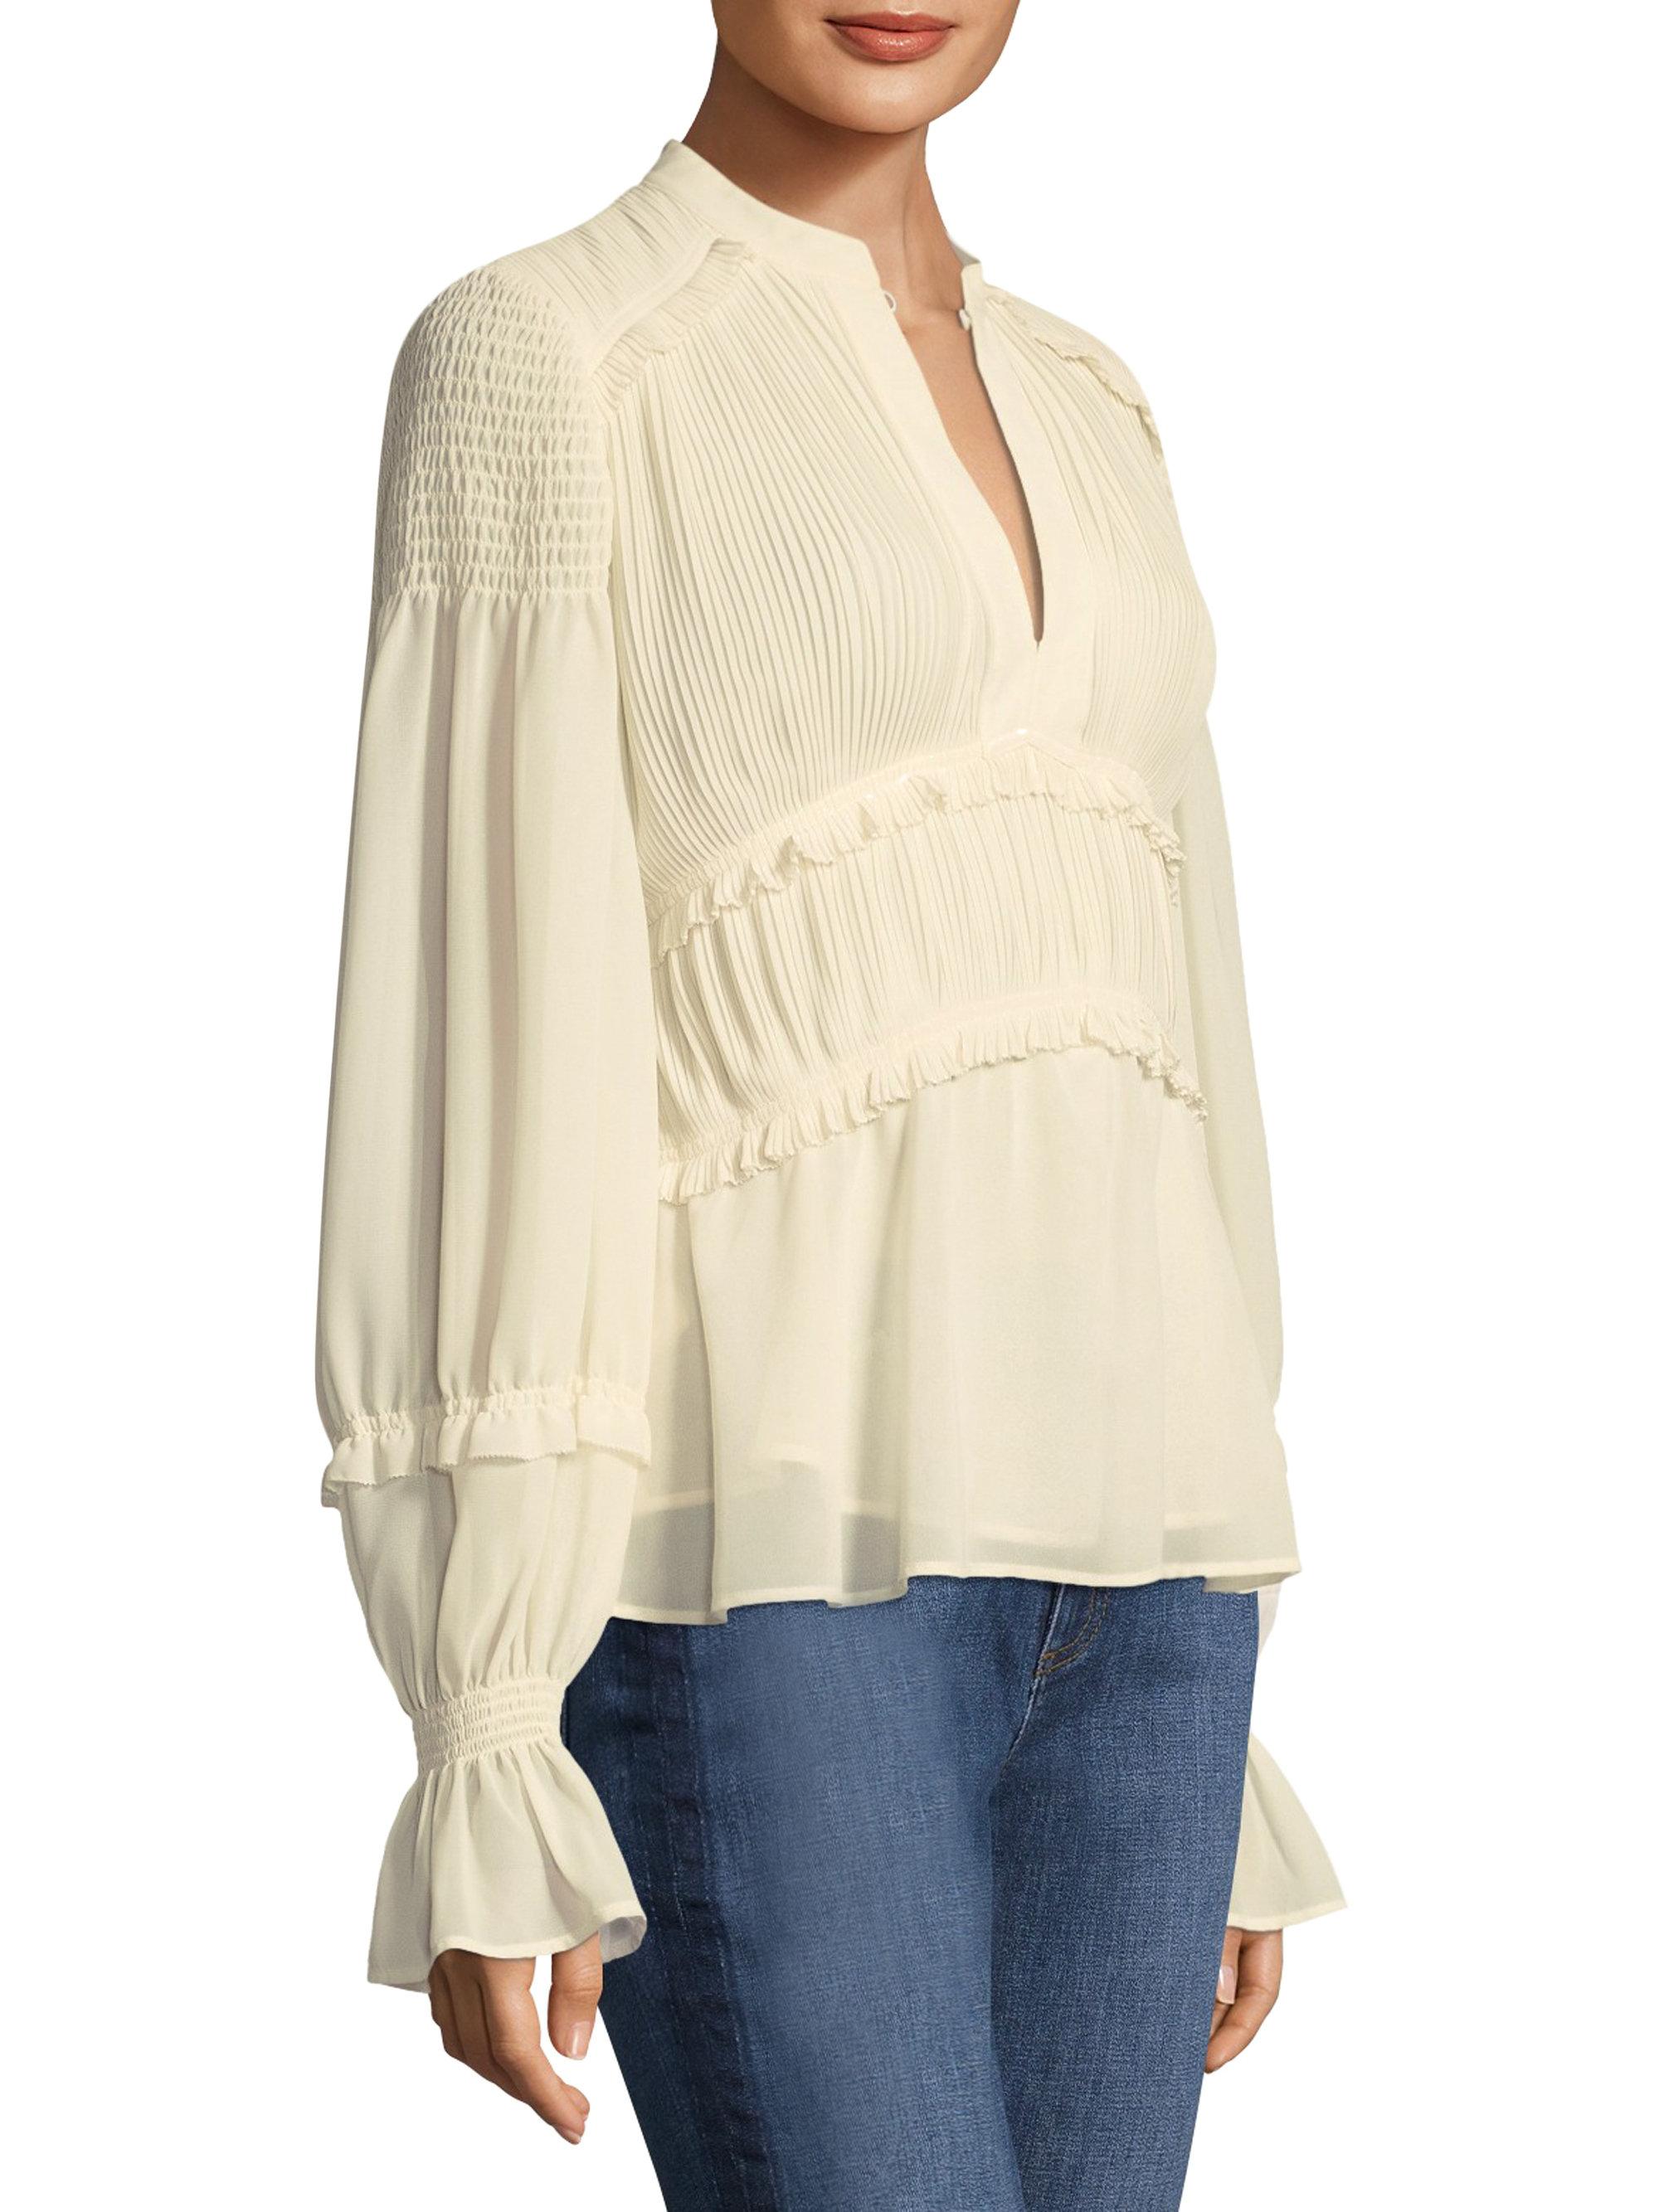 Tory Burch Synthetic Ruffle-trim Bell-sleeve Top - Lyst